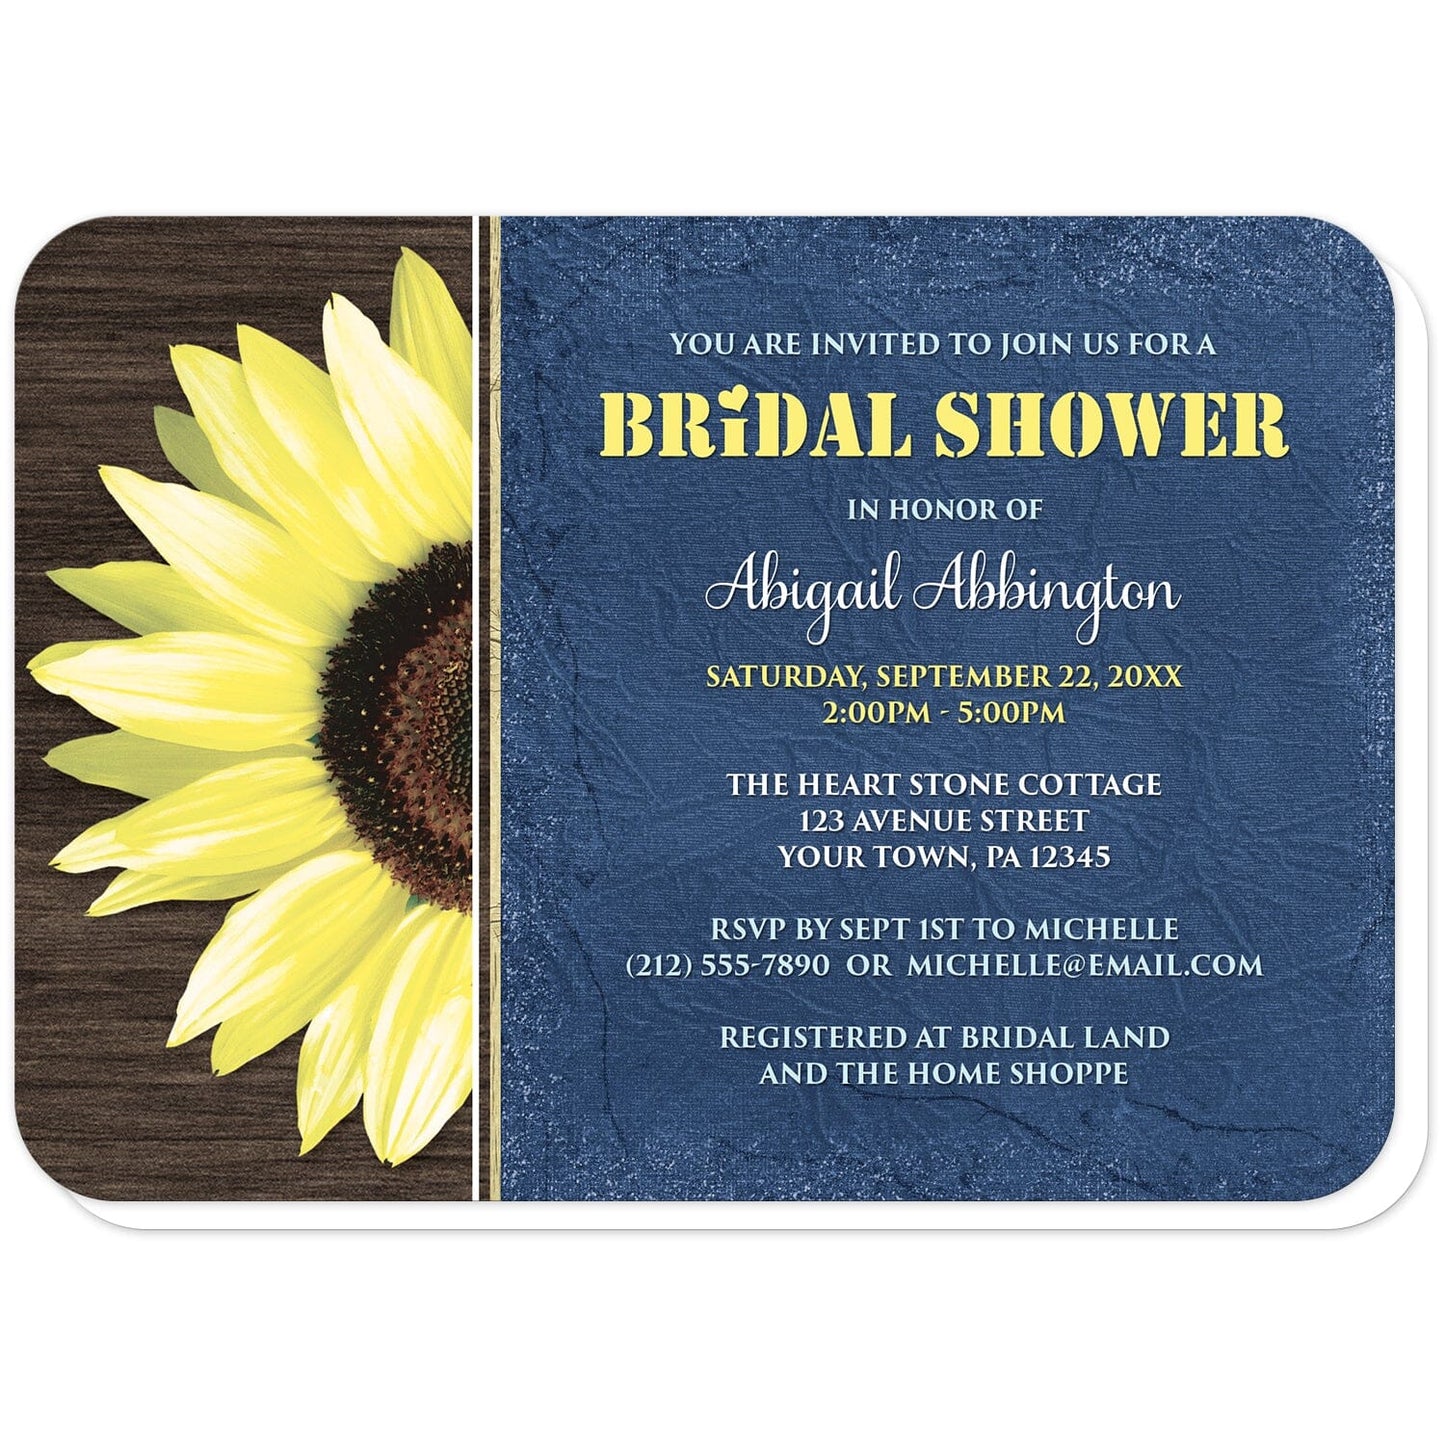 Rustic Sunflower with Blue Bridal Shower Invitations (with rounded corners) at Artistically Invited. Country-inspired rustic sunflower with blue bridal shower invitations featuring a vibrant bright yellow sunflower over a textured dark brown wood design along the left side. Your personalized bridal shower celebration details are custom printed in yellow and white over a tattered blue cloth illustration to the right of the sunflower.